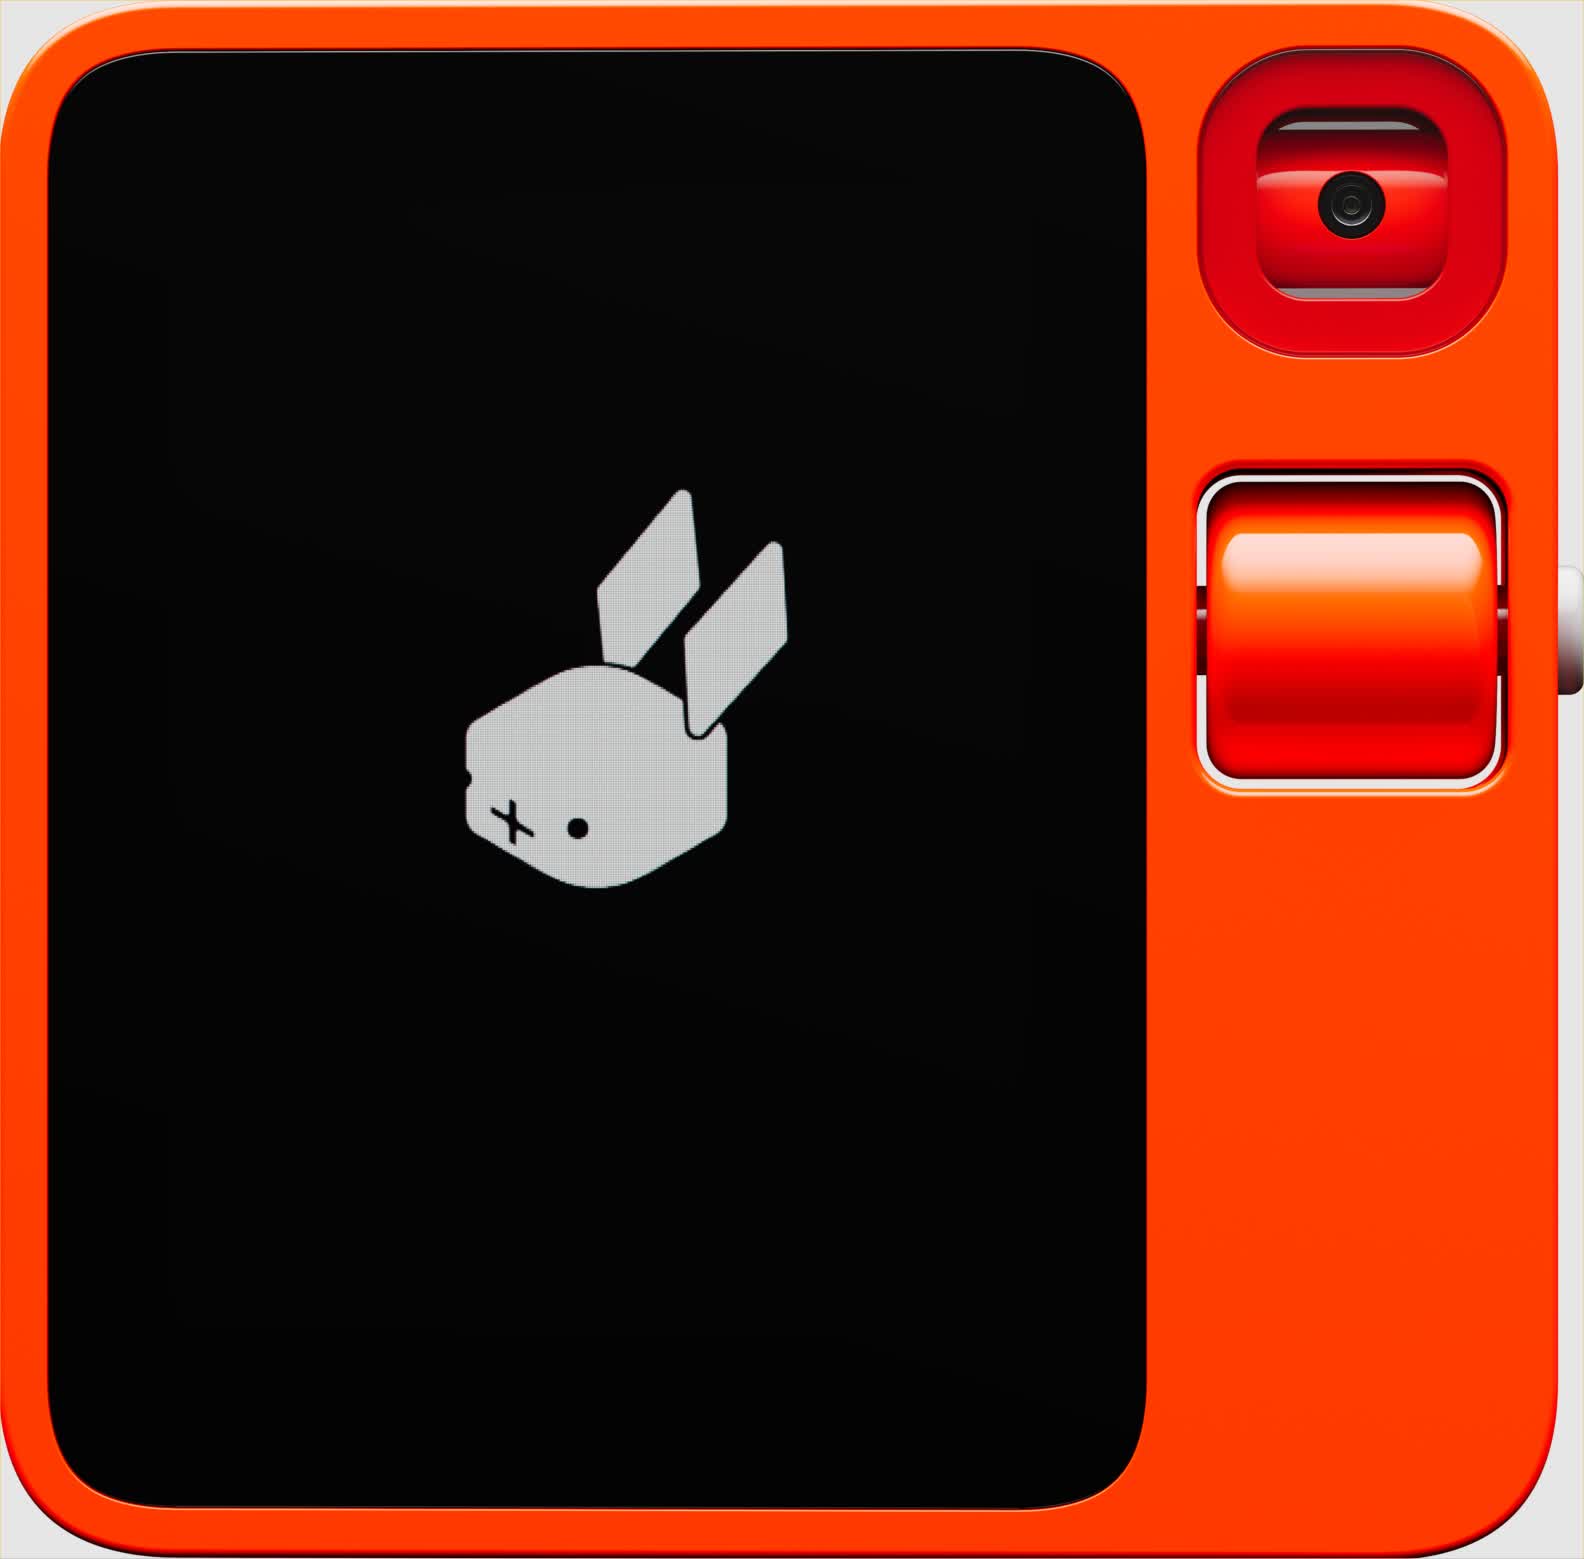 The Rabbit R1 is a standalone, AI-powered gadget that can mimic human app usage